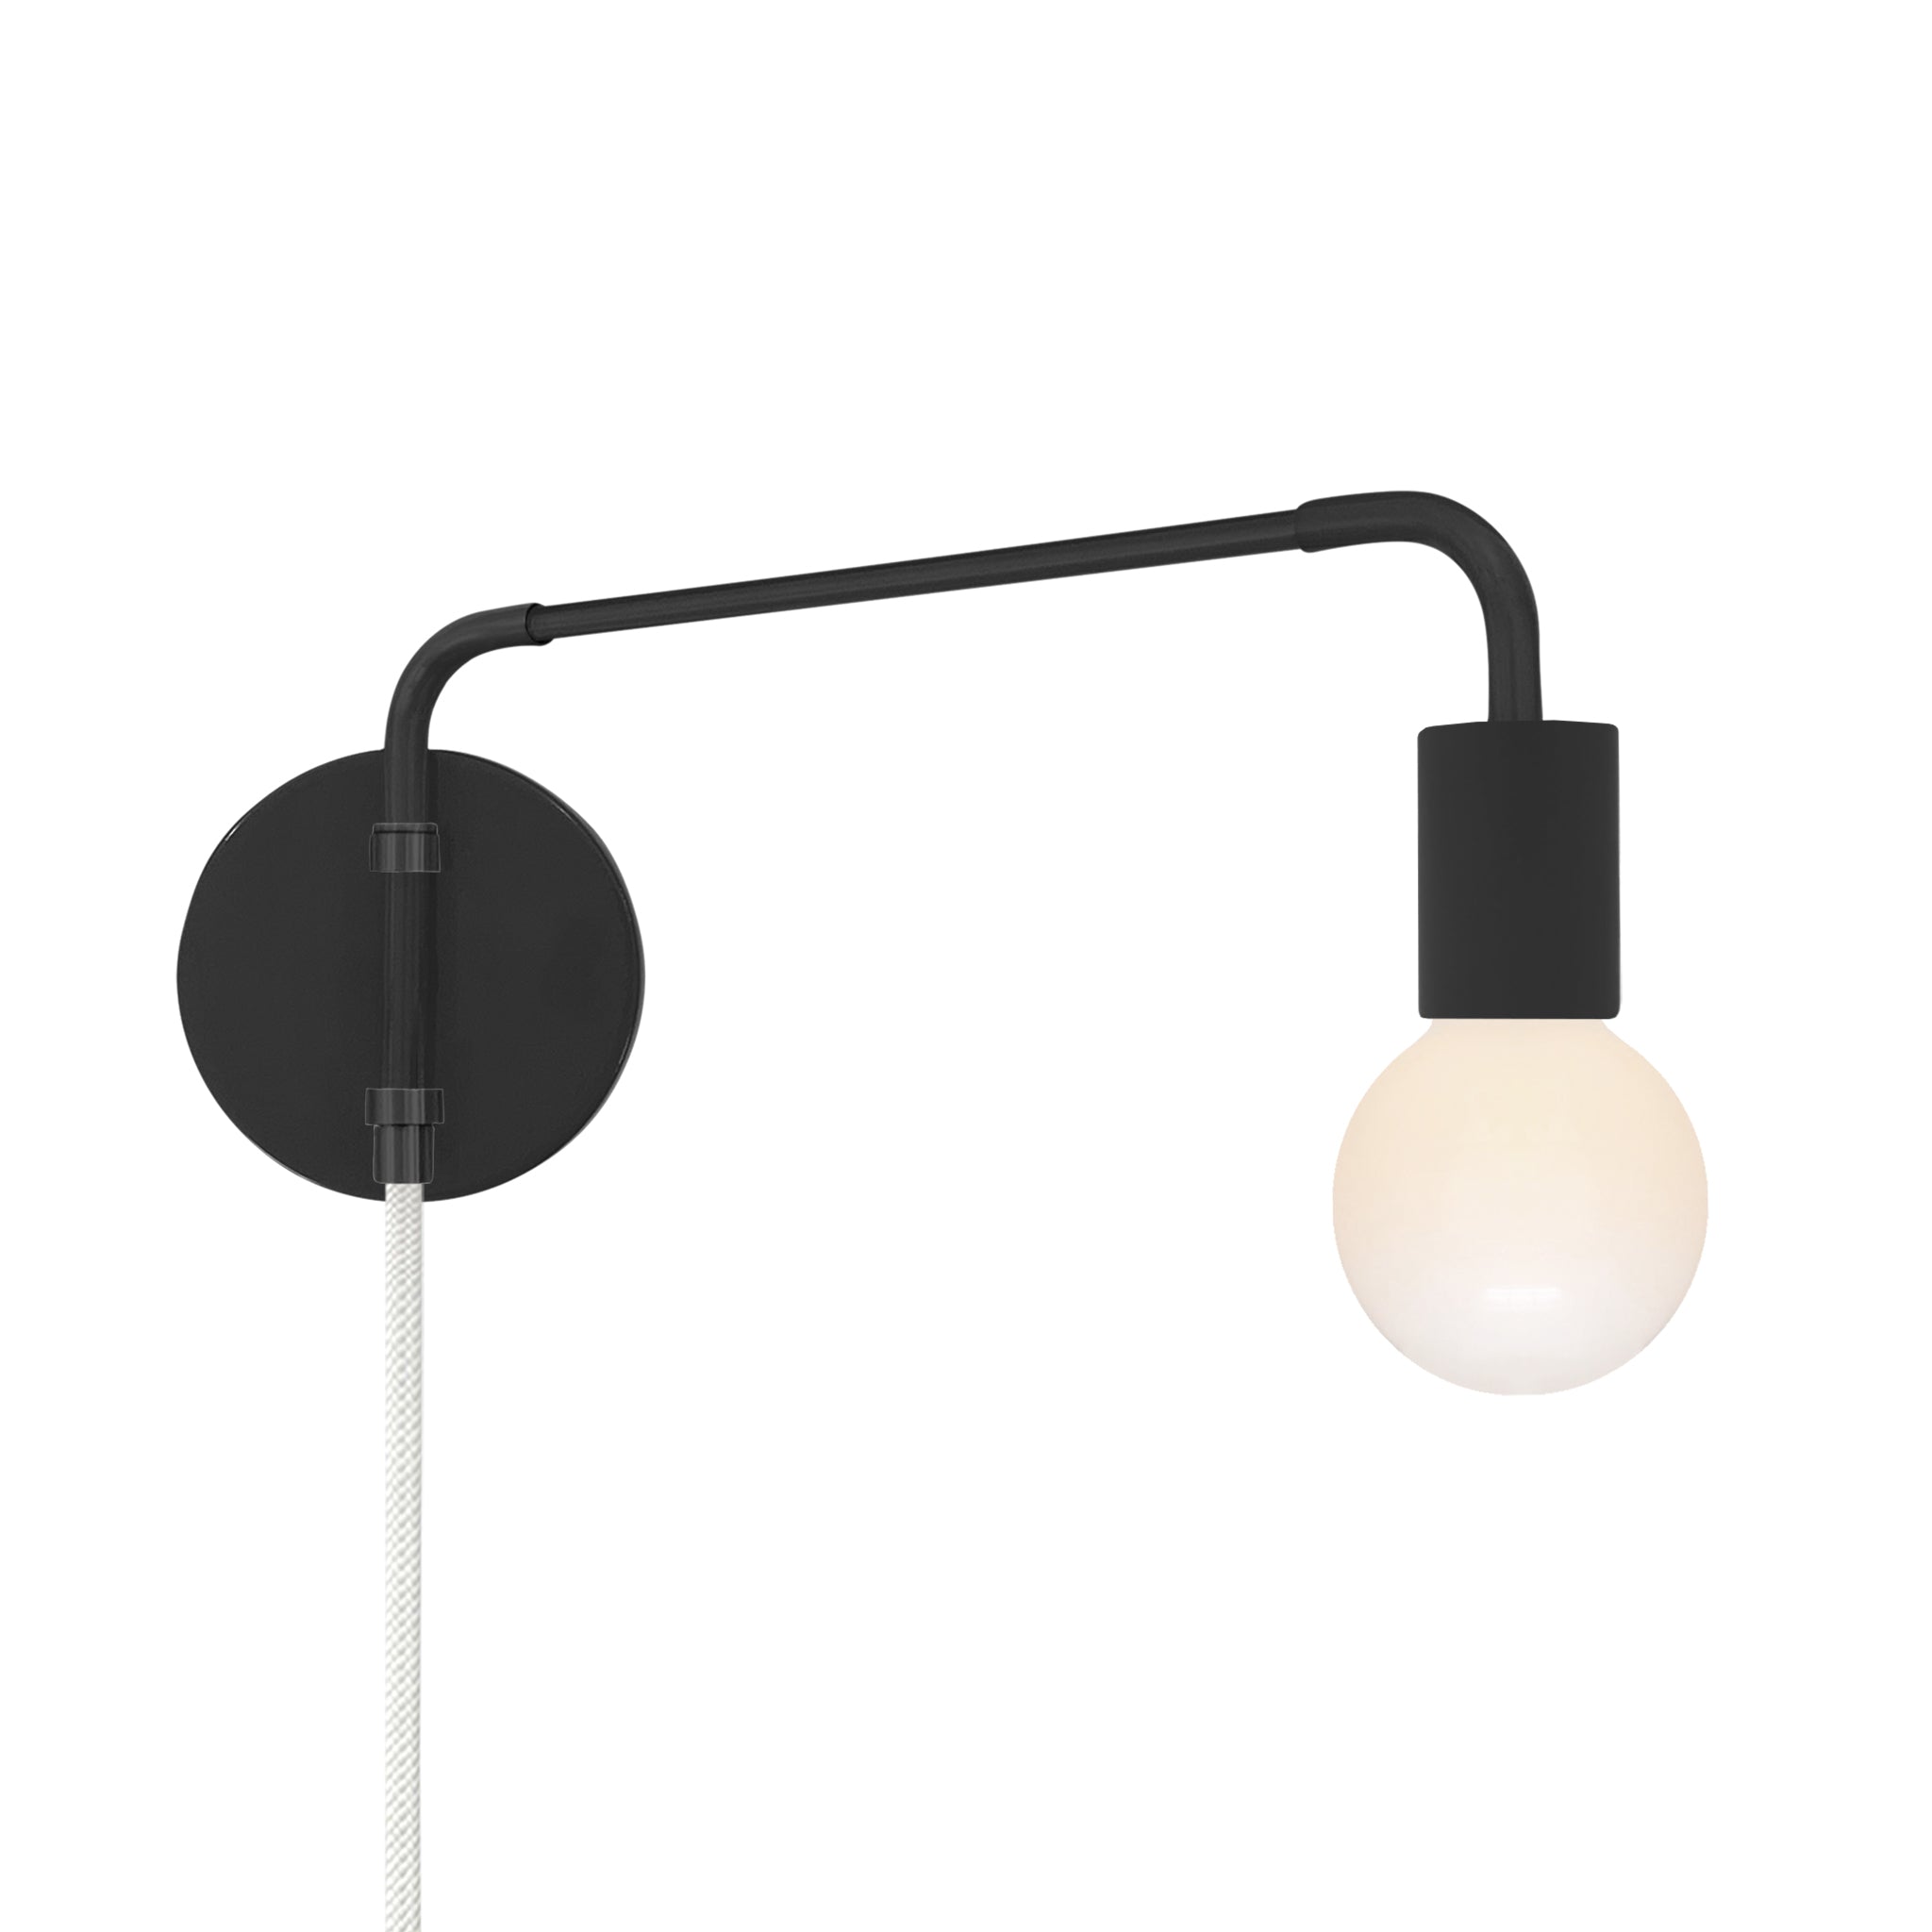 Black and black color Sway plug-in sconce Dutton Brown lighting